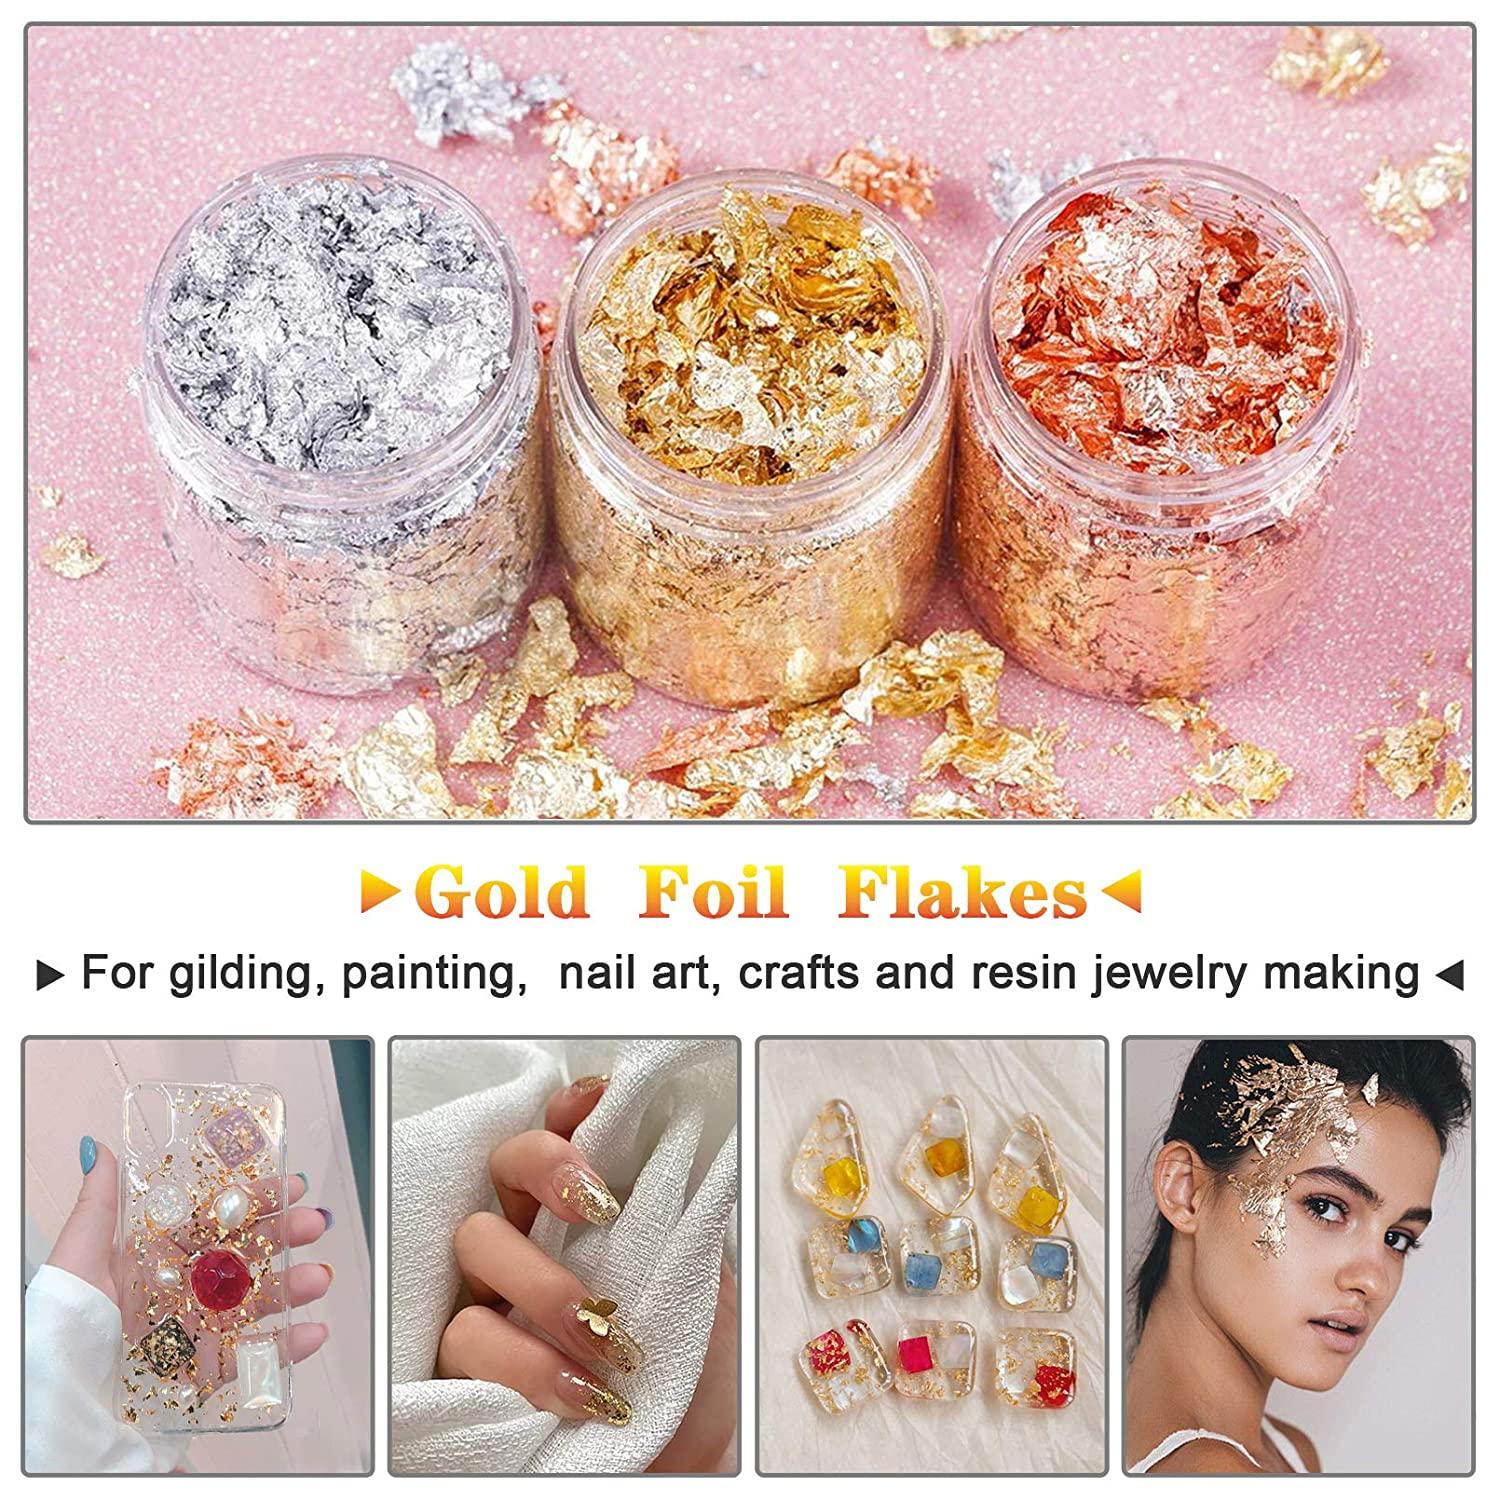 Gold Foil Flakes for ,3 Bottles Foil Flakes for Arts and Crafts